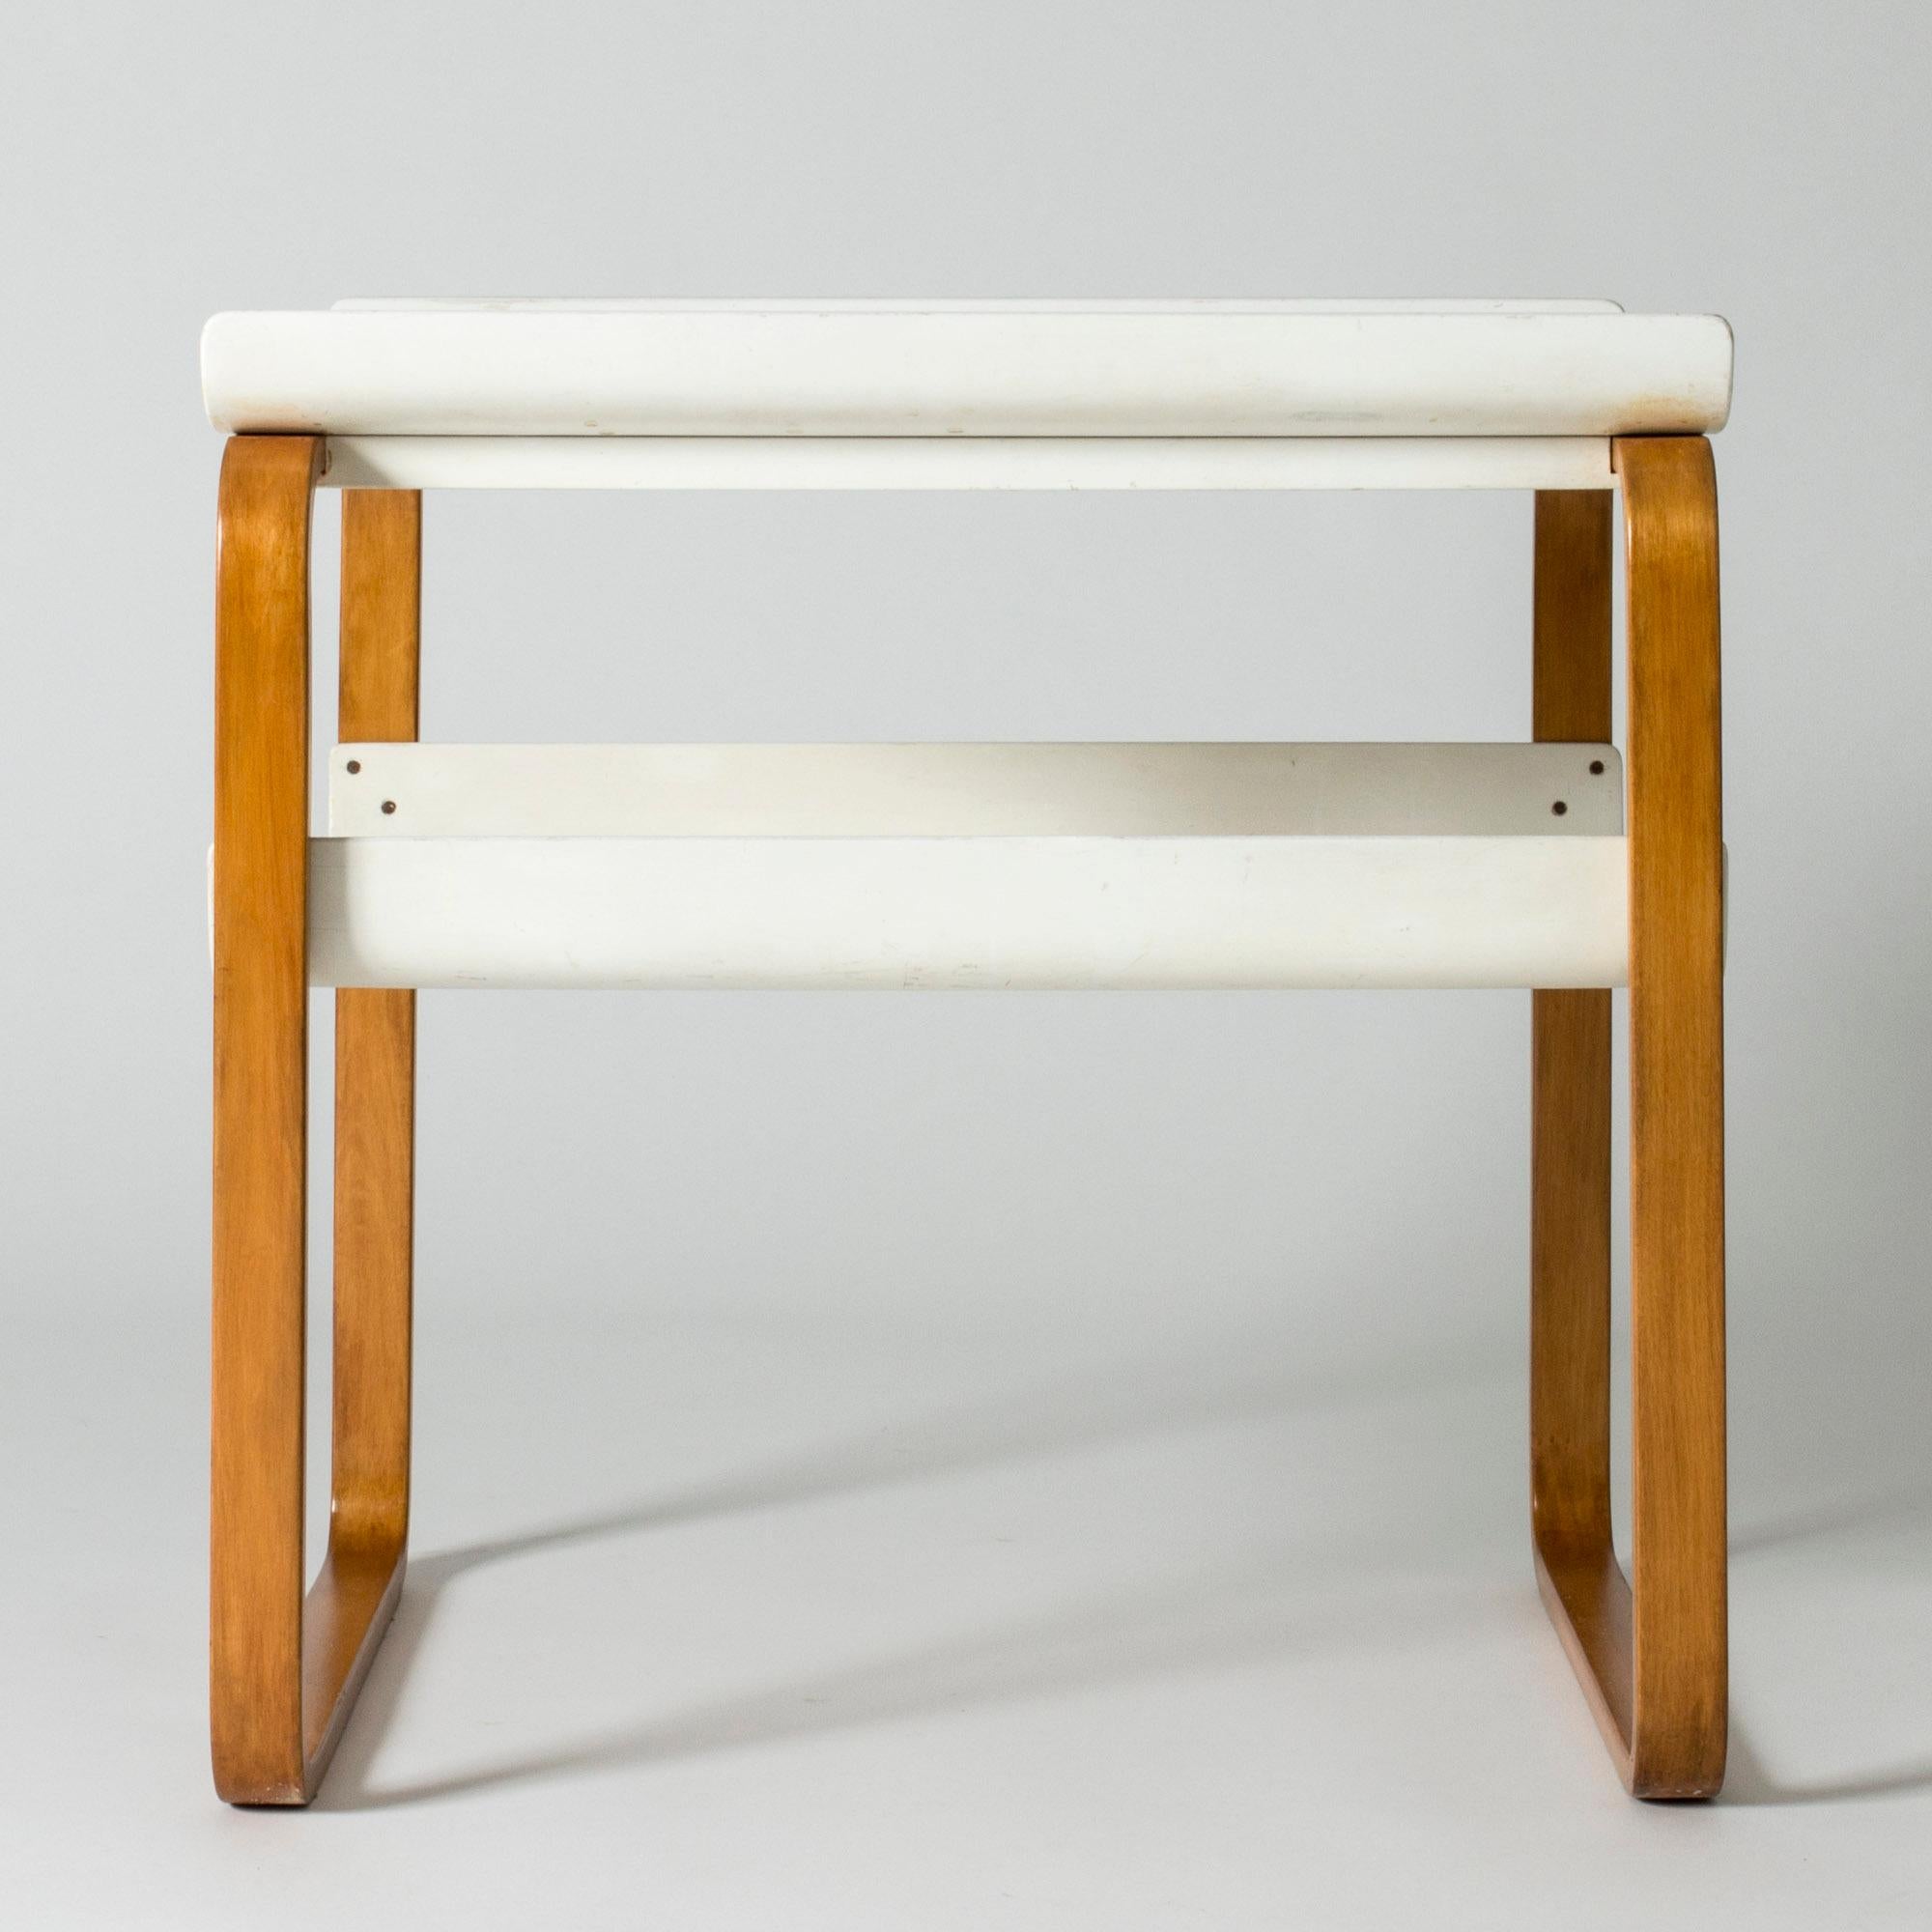 Side table 915 by Alvar Aalto, made from birch bentwood with a white lacquered table top and shelf. Appealing, flowing lines with soft corners. Designed in 1932, originally for the Paimio Sanatorium in Finland.